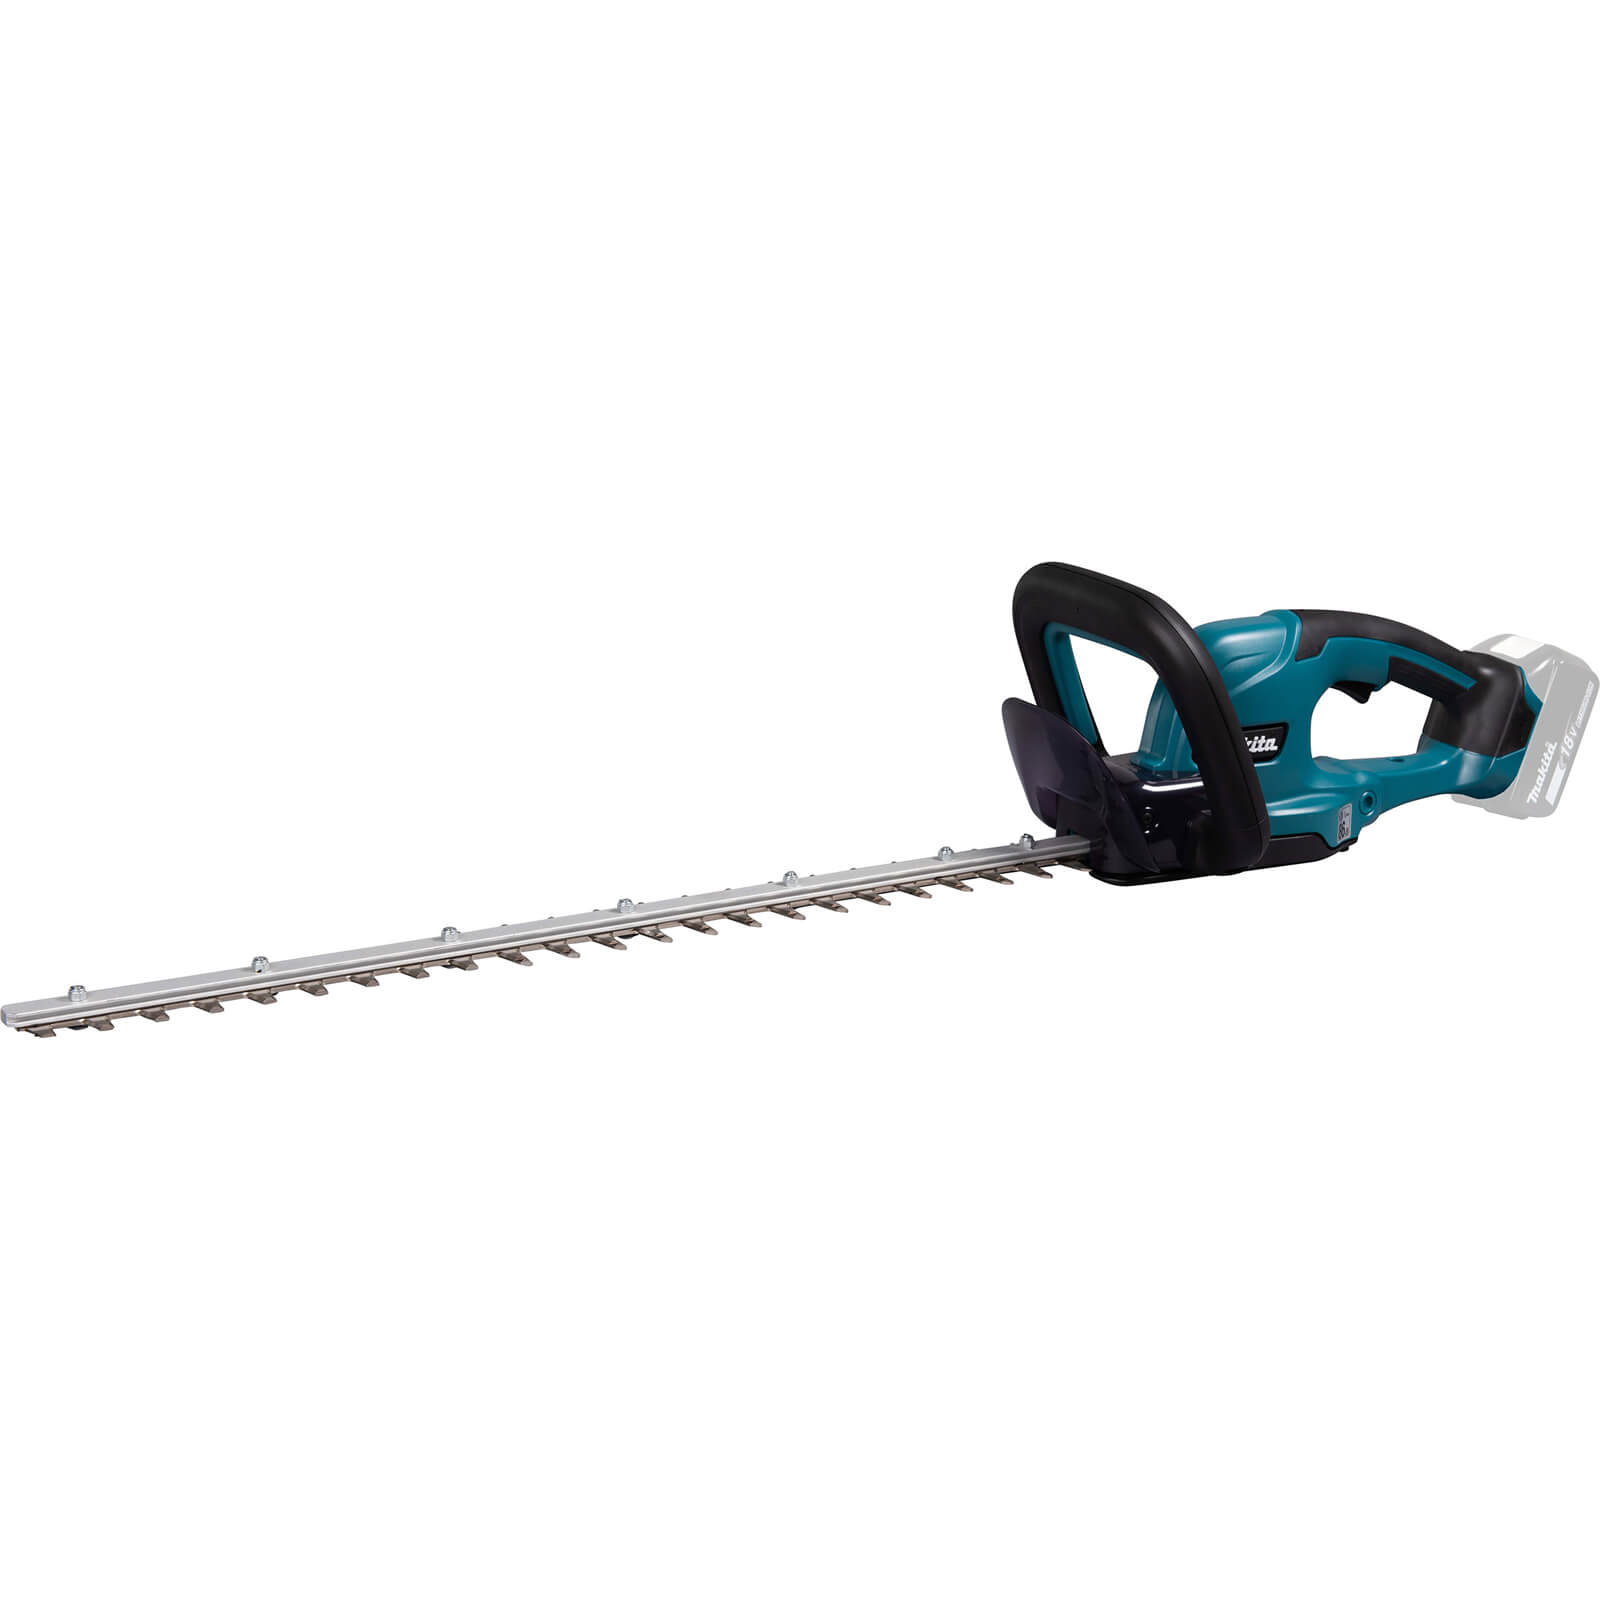 Image of Makita DUH607 18v LXT Cordless Hedge Trimmer 600mm No Batteries No Charger